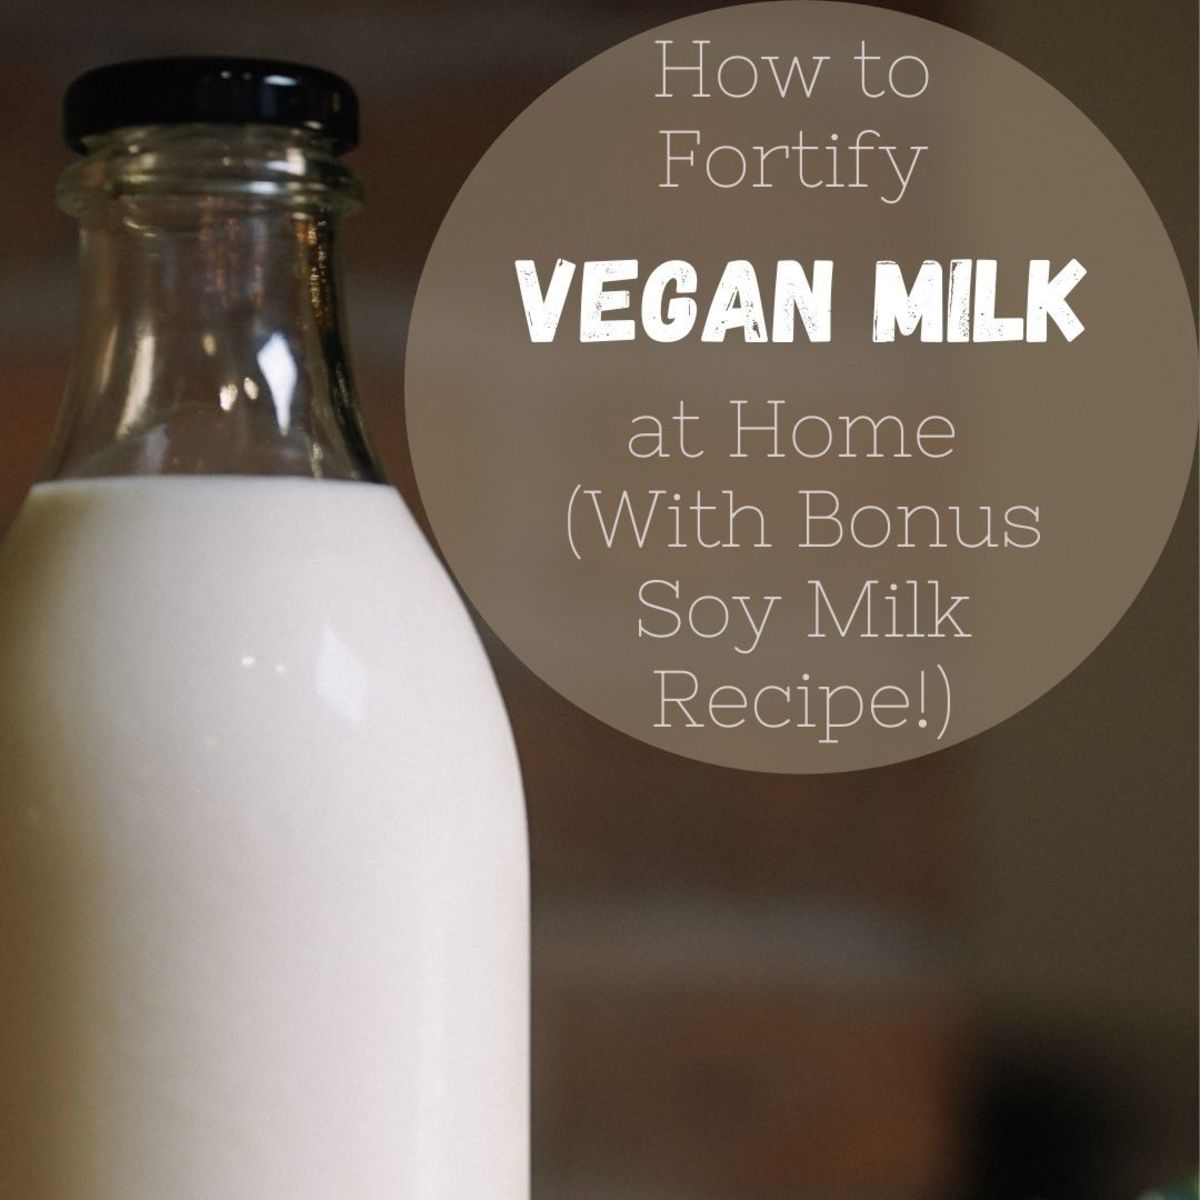 Learn how to add calcium and vitamins D3 and B12 to fortify plant-based milks in the comfort of your own home!